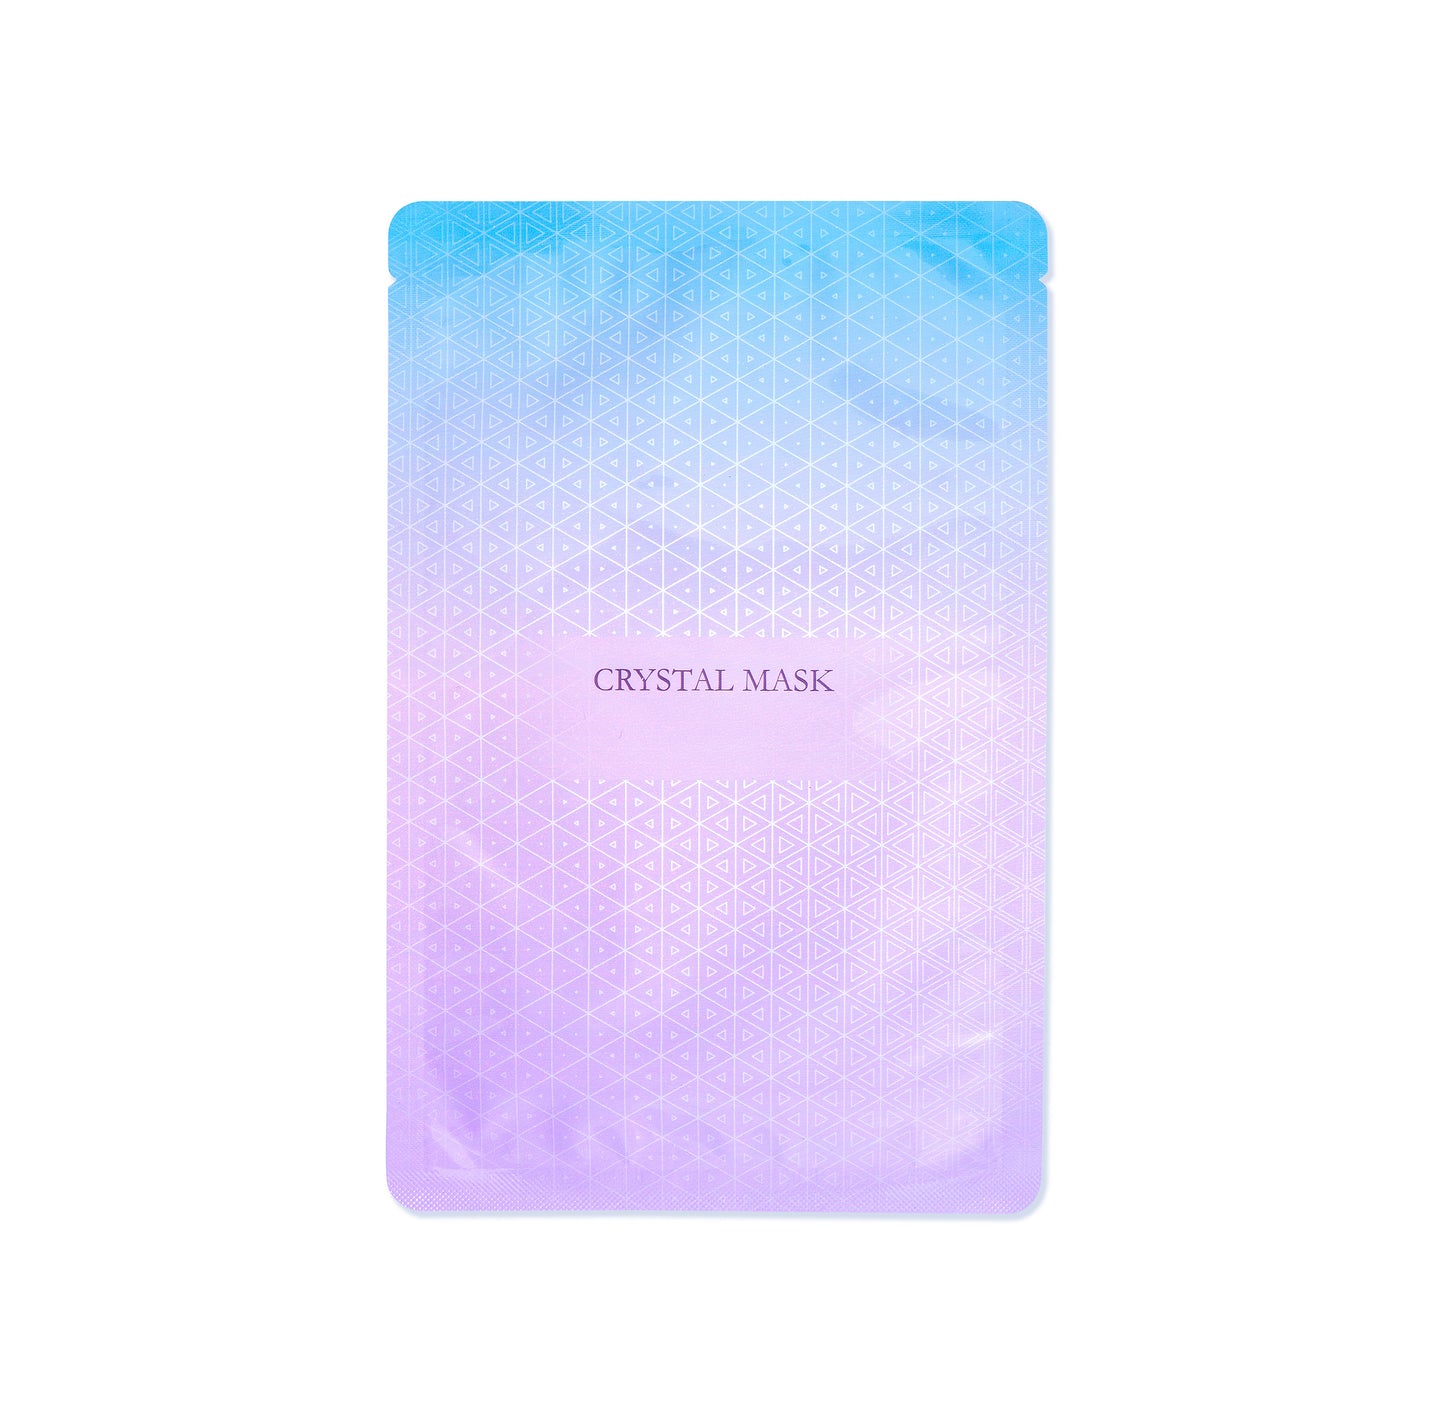 [Deep water lock] 600-second pink crystal first aid mask 4 boxes ($200 will be automatically deducted for each set at checkout)